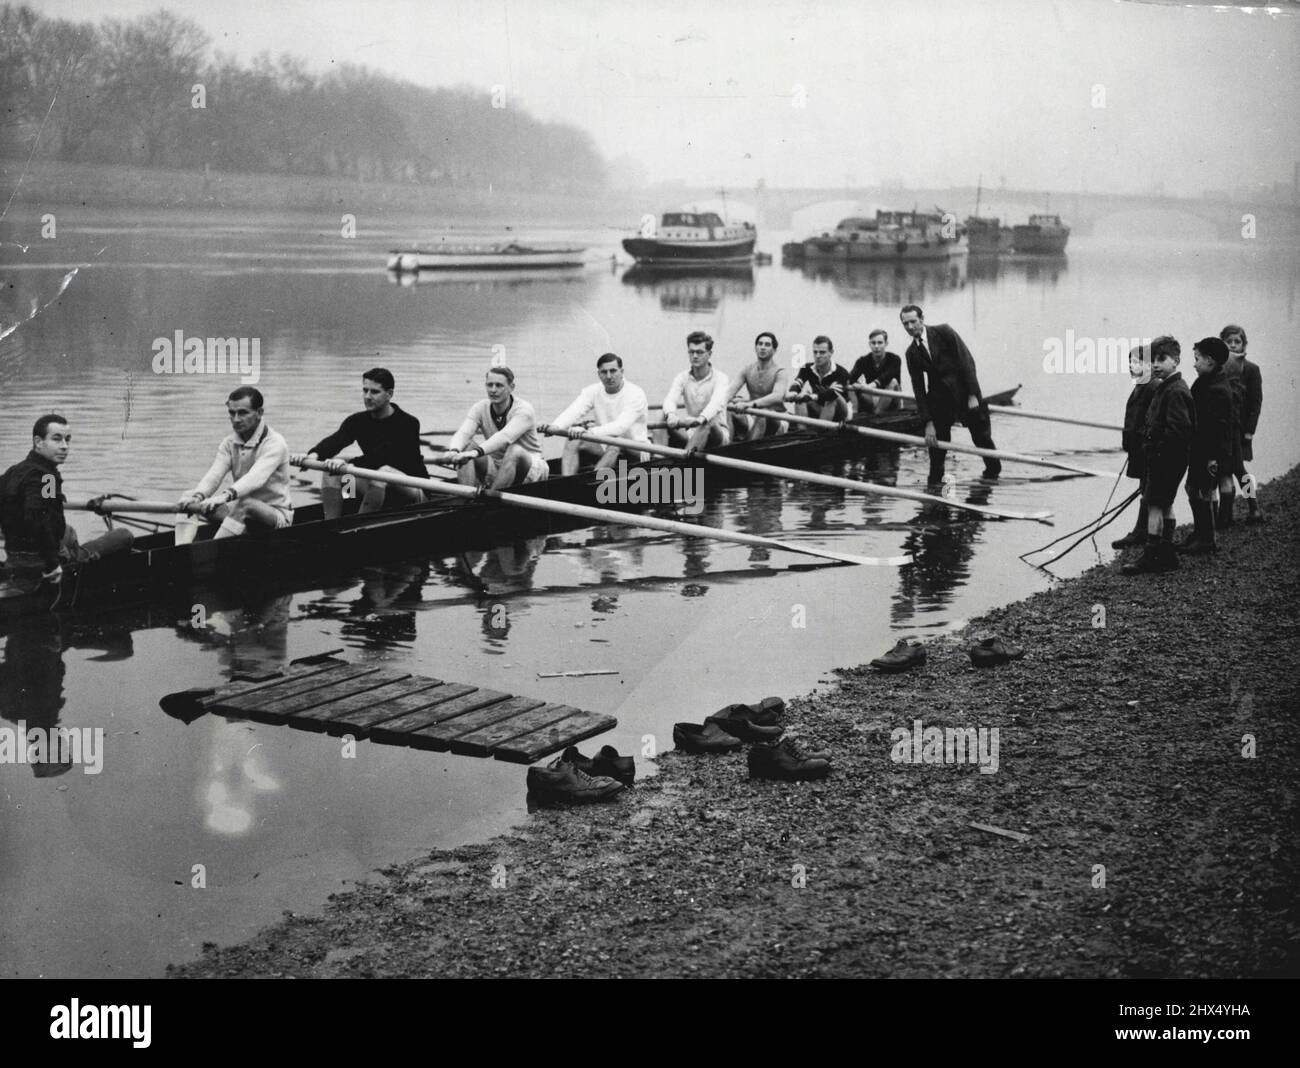 Australian Oarsmen in England, who are hoping to form an eight to represent Australia in Olympic Games, have been holding trials on the Thames. Several combinations have been tried from amongst the twenty-three oarsmen so far available.Here one of the combinations shown, using a practice shell borrowed from the Thames rowing club, Putney.The crew is : Bow Graham Fisk (Sydney), 2 Brian Lloyd (Sydney), Colin Smith (Sydney), 4 Bill Lester, 5 Dr. James Guest OBE, (Melbourne), 6 Dr. William Woodward (Sydney), 7 Larry Foley (Sydney), Stroke Gordon Hill (Perth), Cox Peter Lawrence. January 01, 1948. Stock Photo